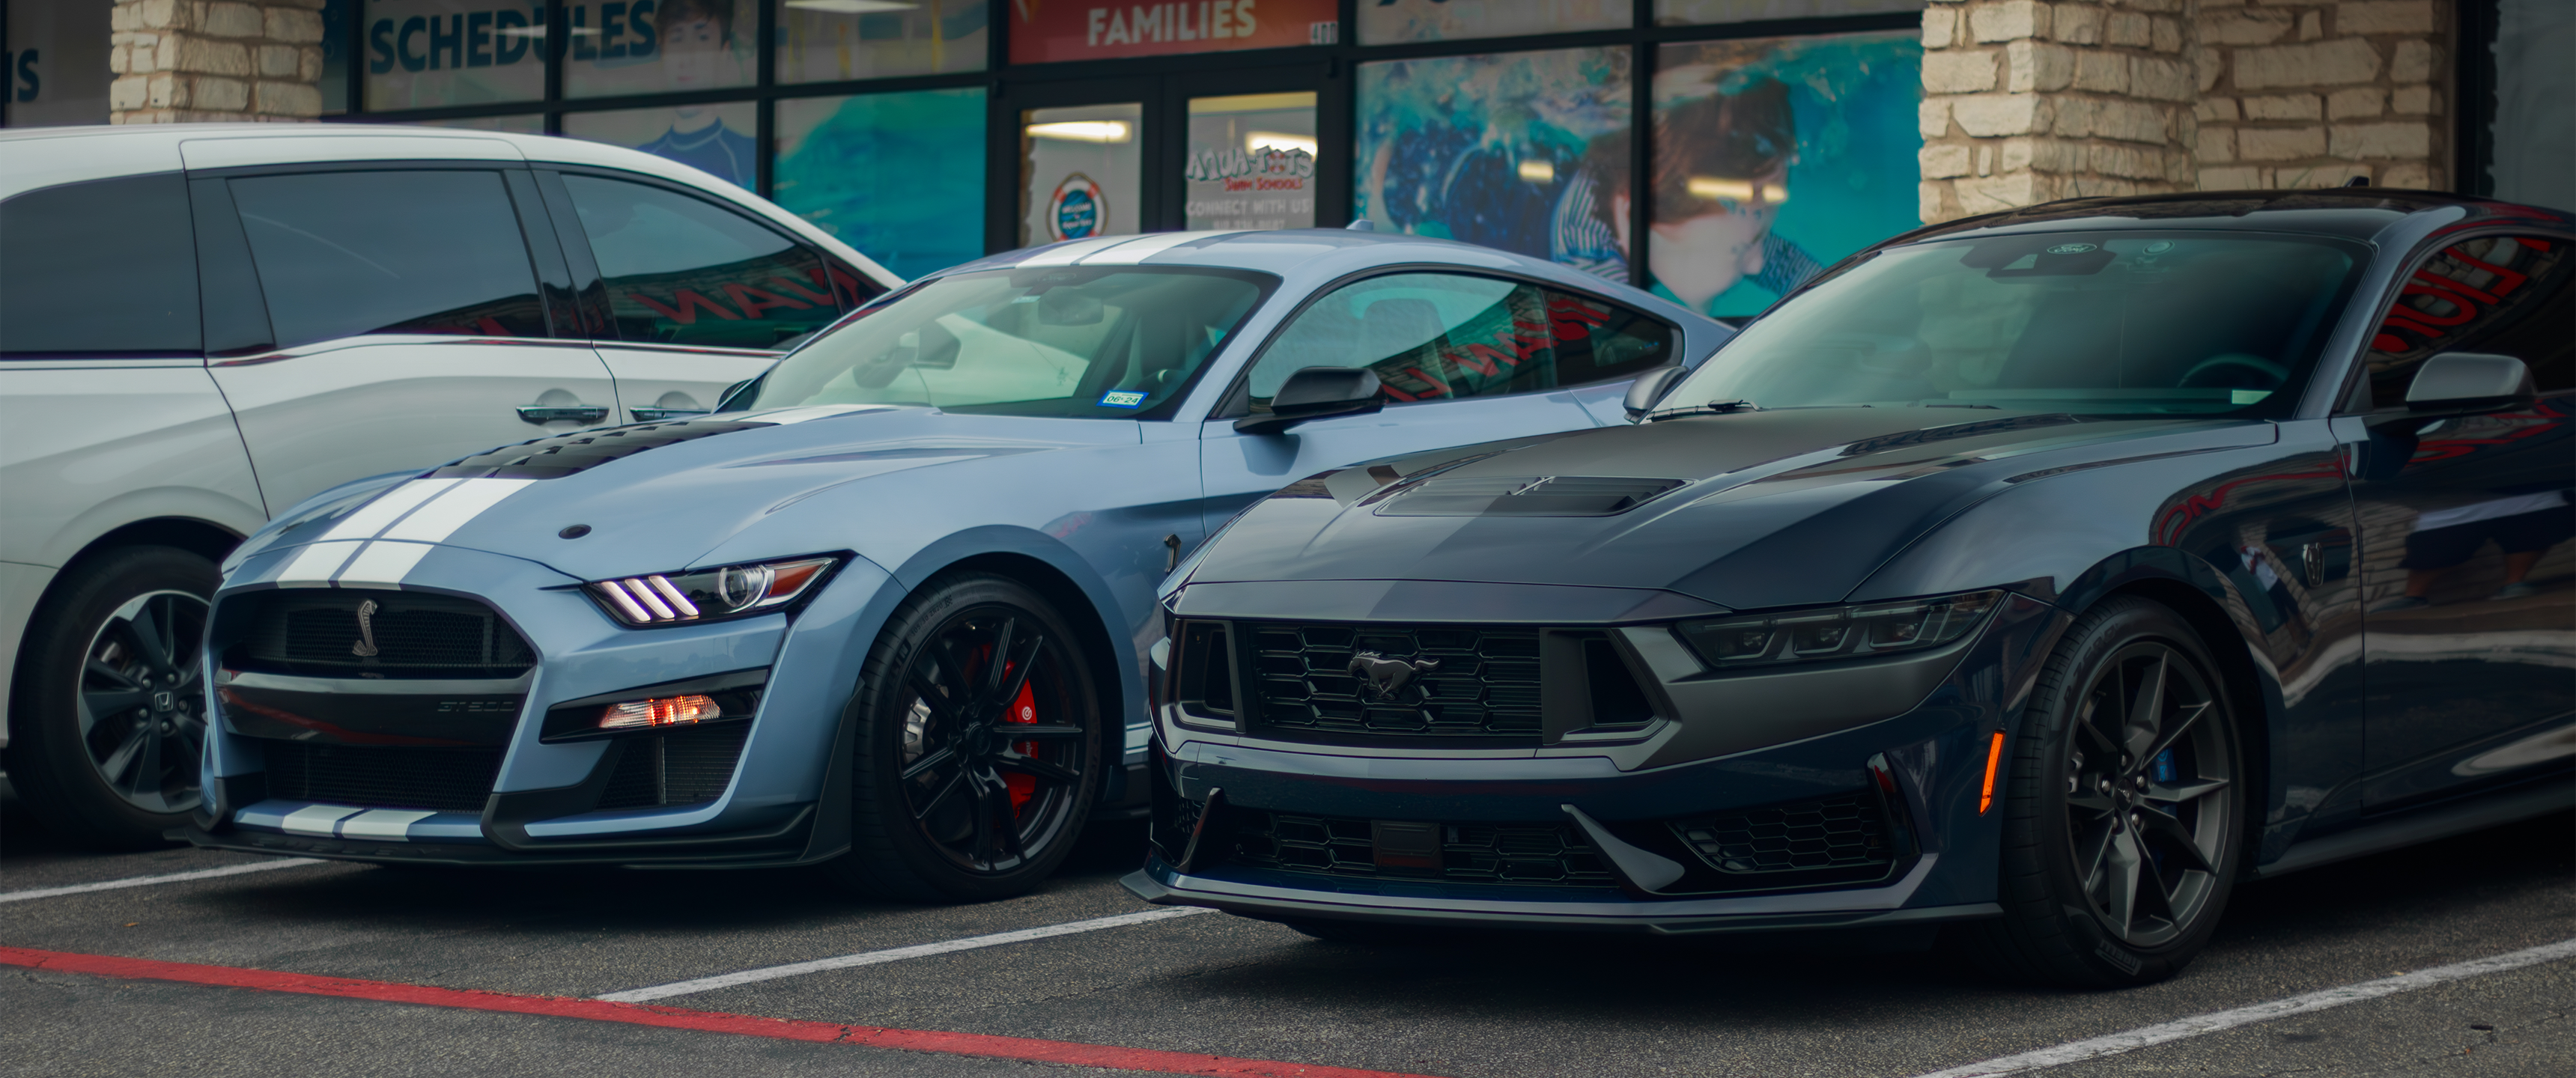 General 3440x1440 car Ford Mustang Ford Mustang Shelby mustang Dark Horse parking parking lot frontal view vehicle building